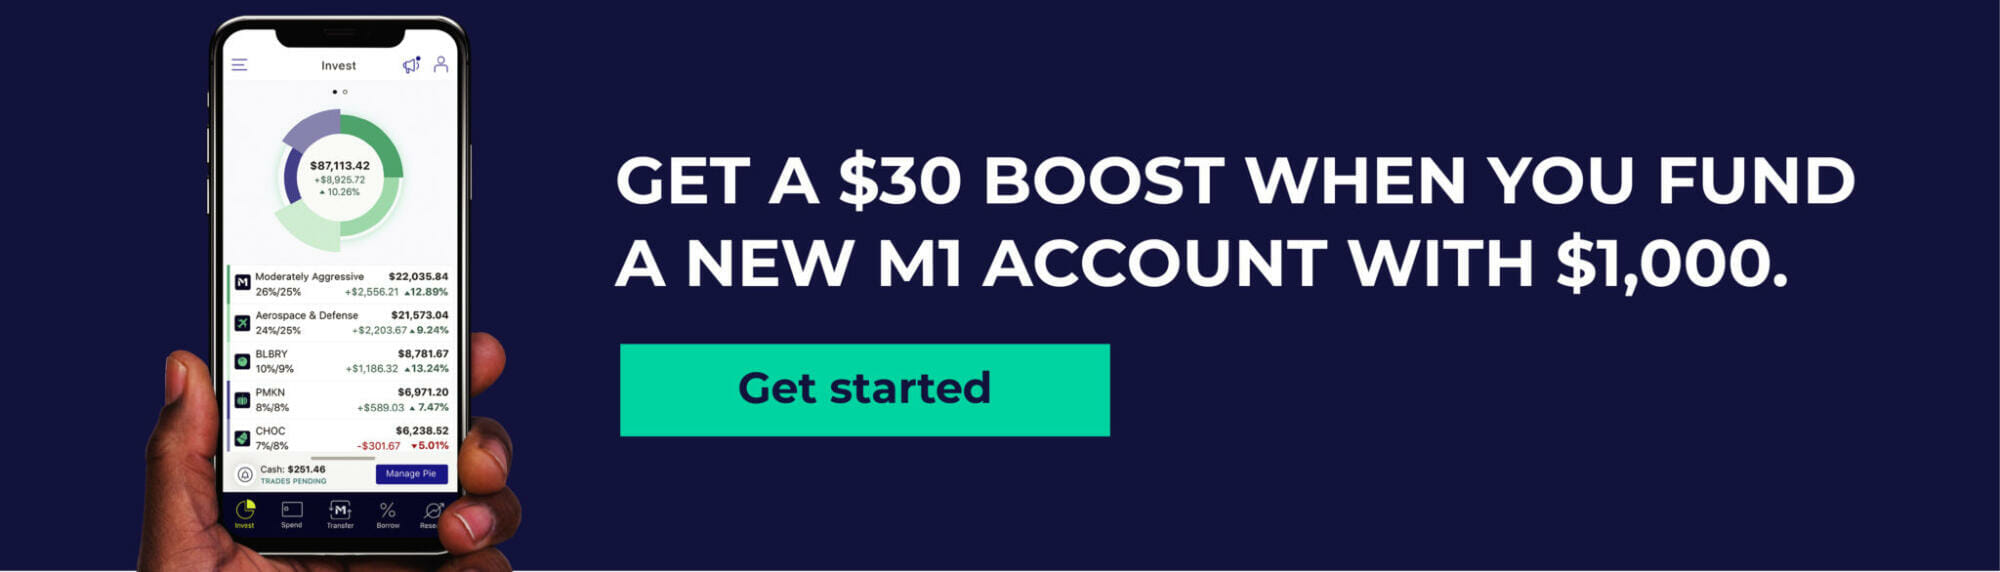 Get a $30 boost when you fund a new M1 account with $1,000.